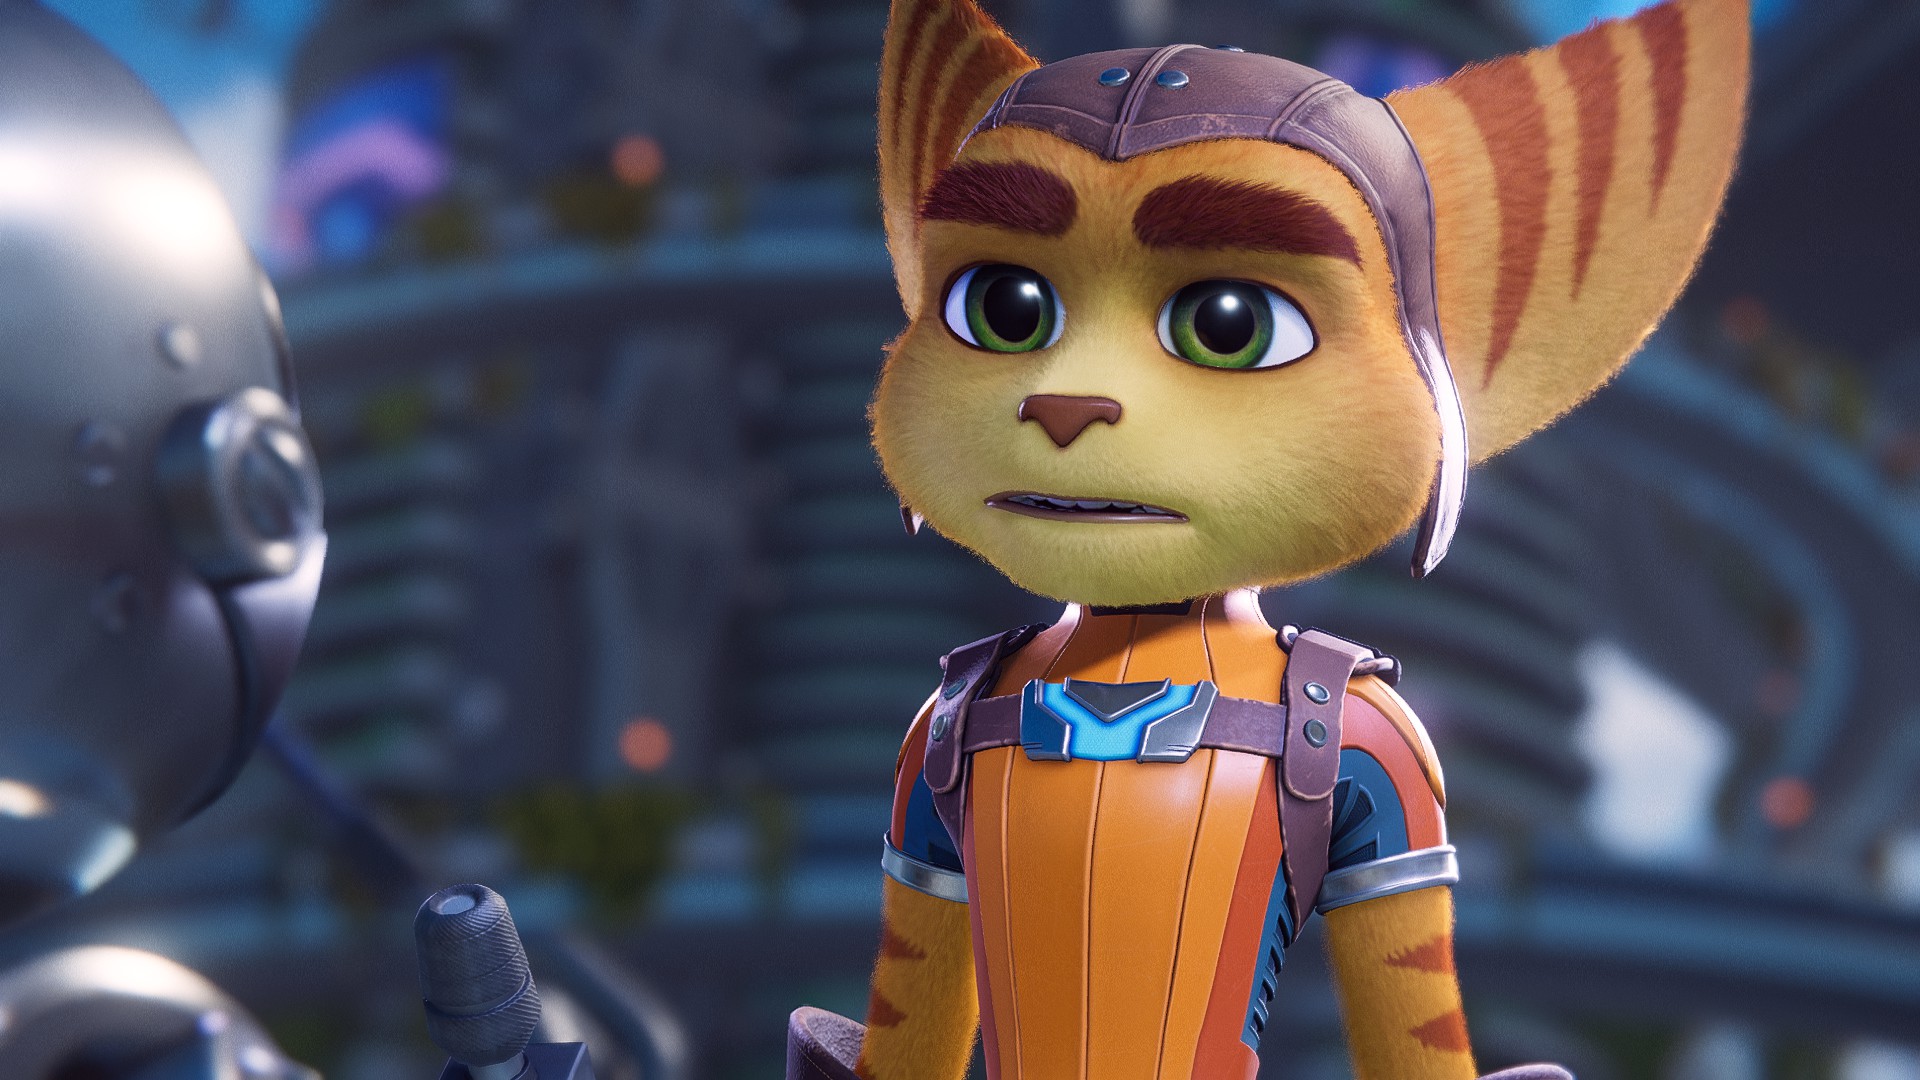 File submarine Mosque Ratchet & Clank Rift Apart PC Port Review – A Superb Way to Play the Game |  The Outerhaven